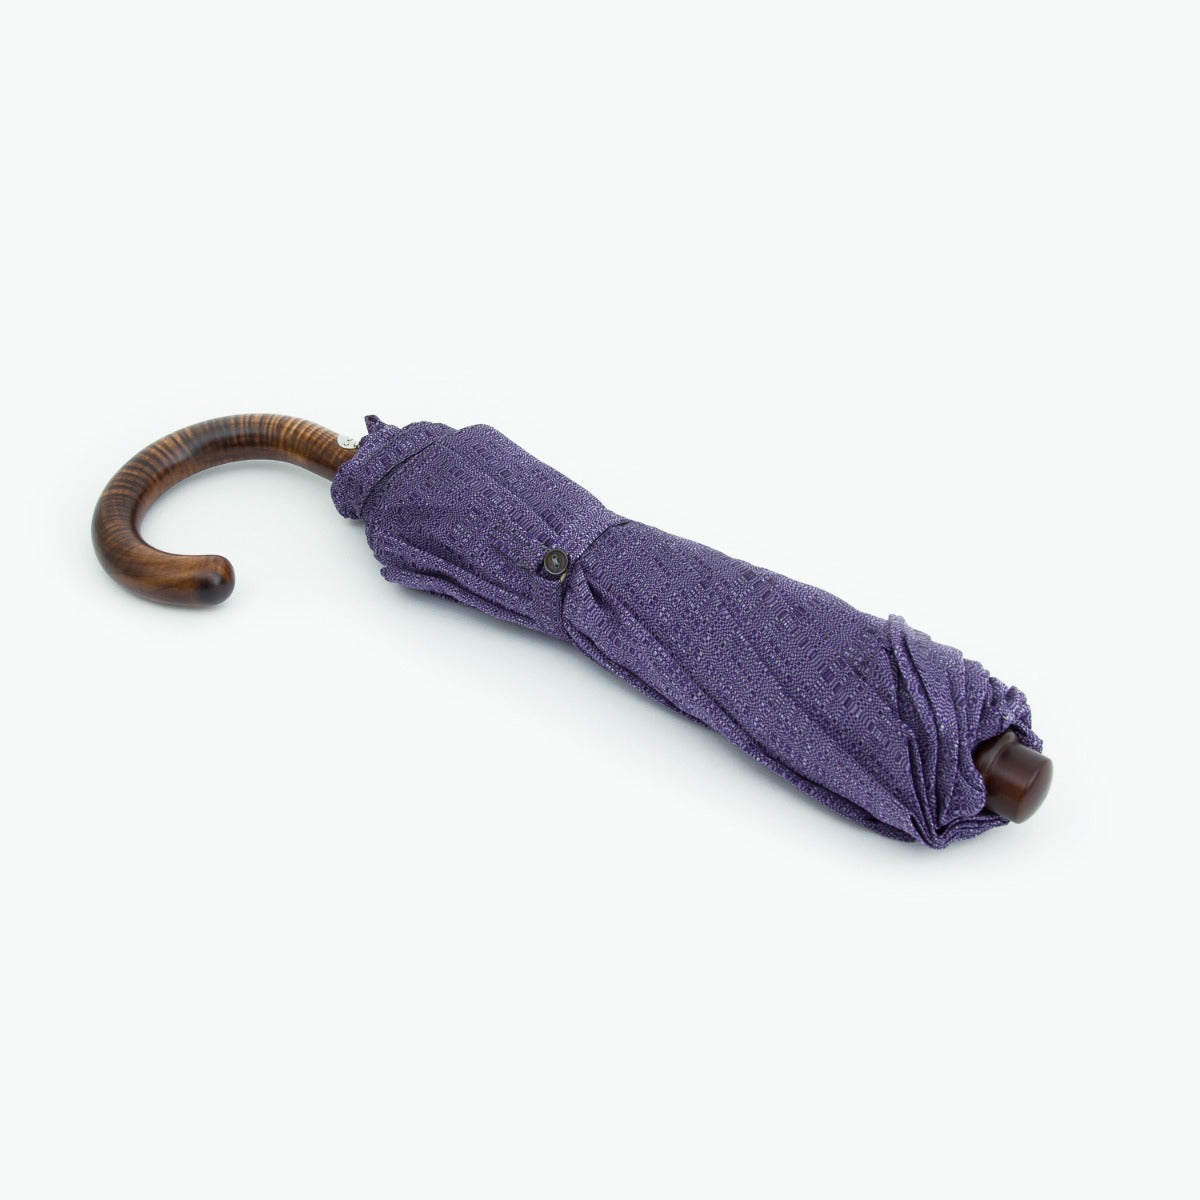 A Imperial Purple Travel Umbrella with Maple Handle by KirbyAllison.com.